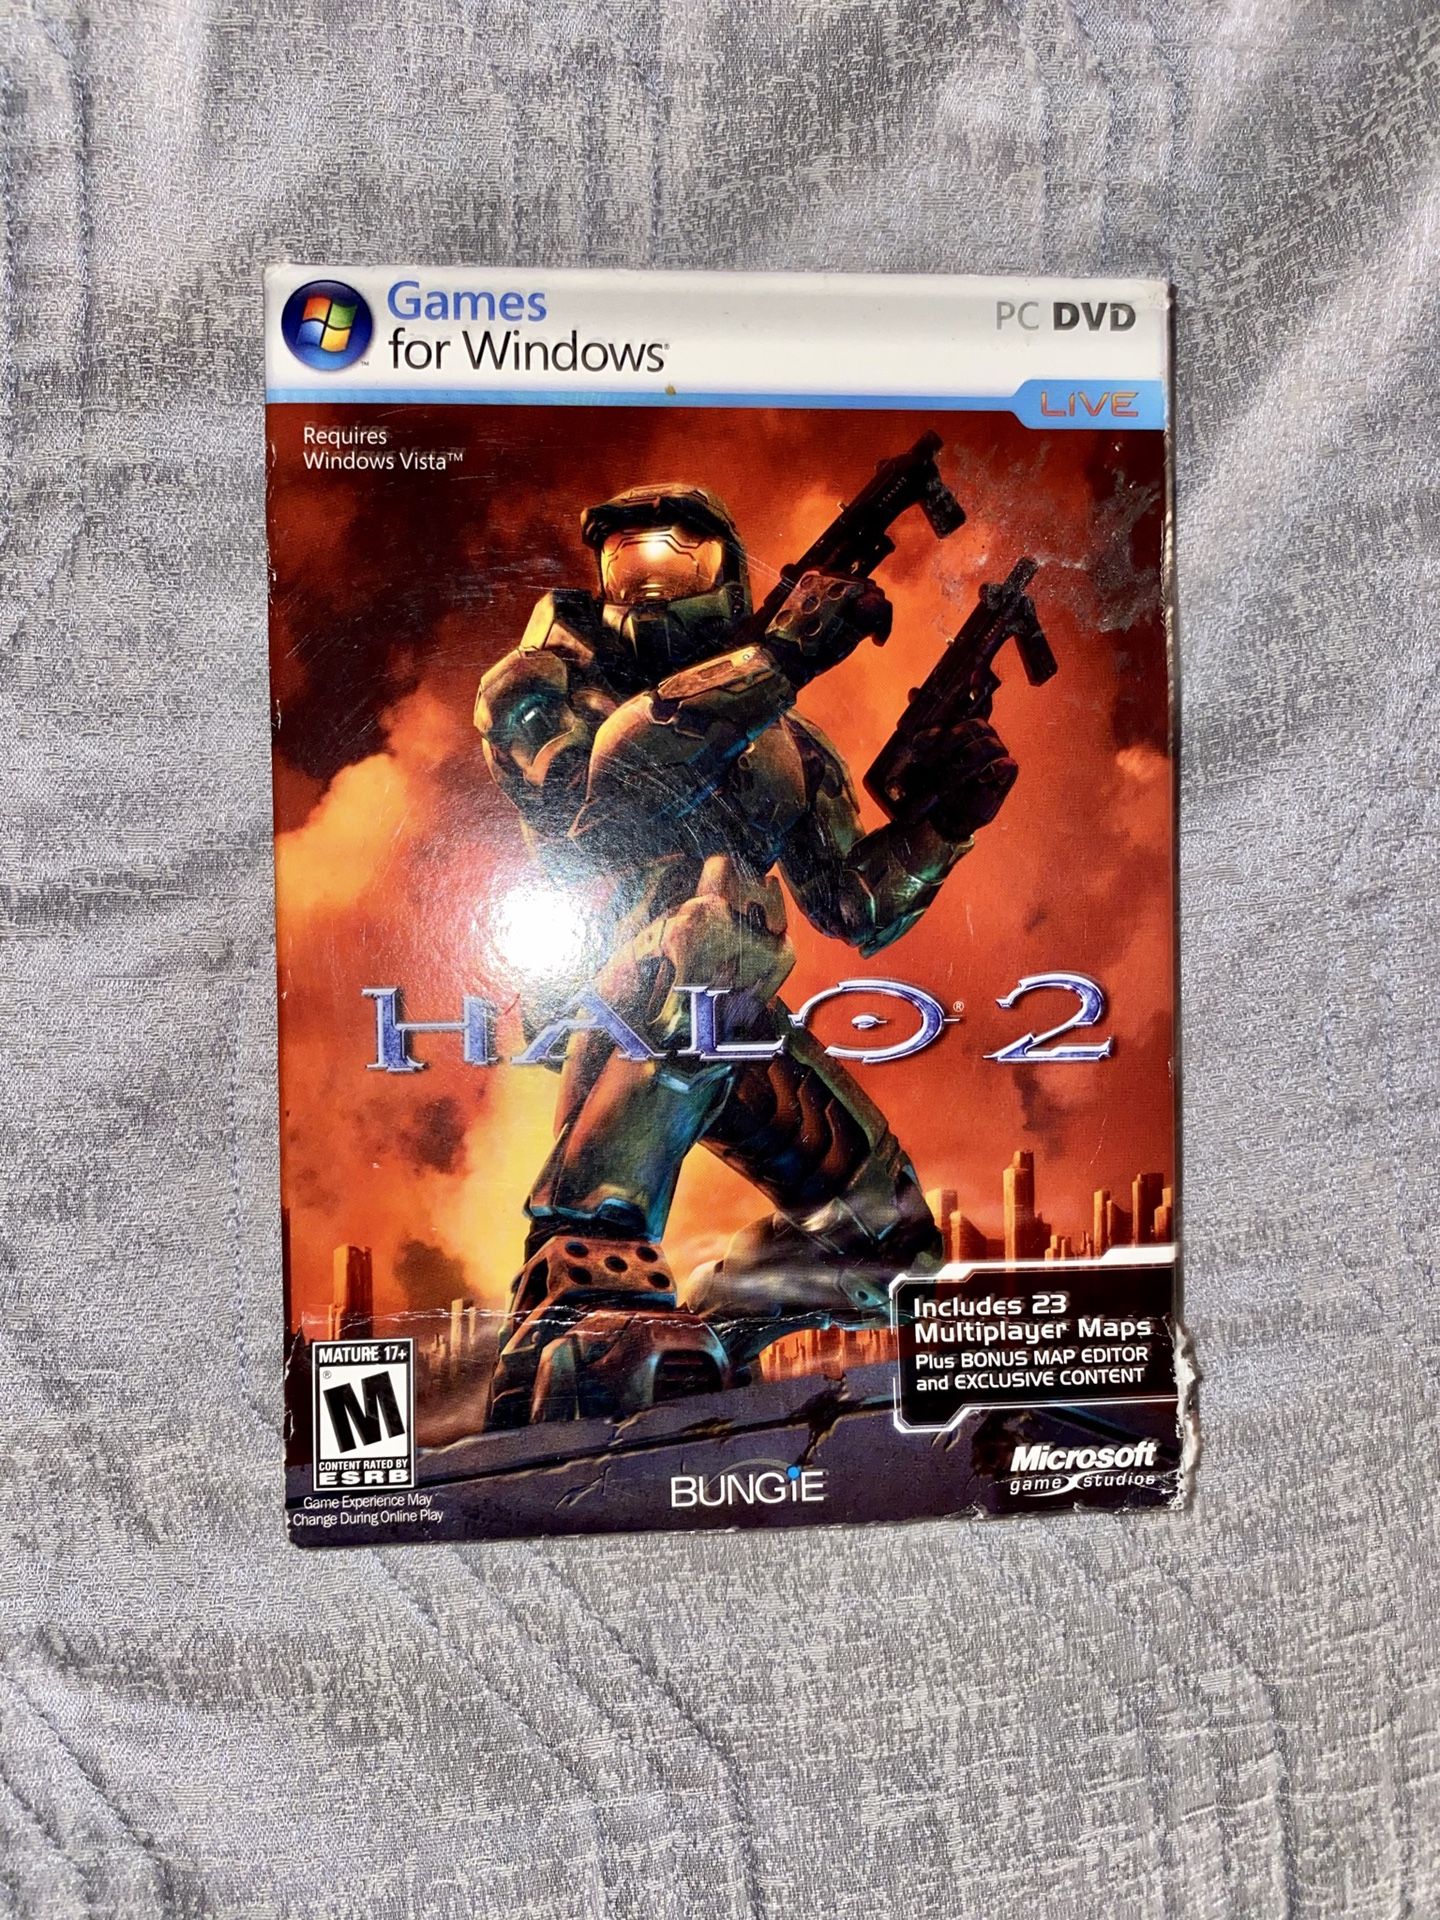 Halo-2 for the PC